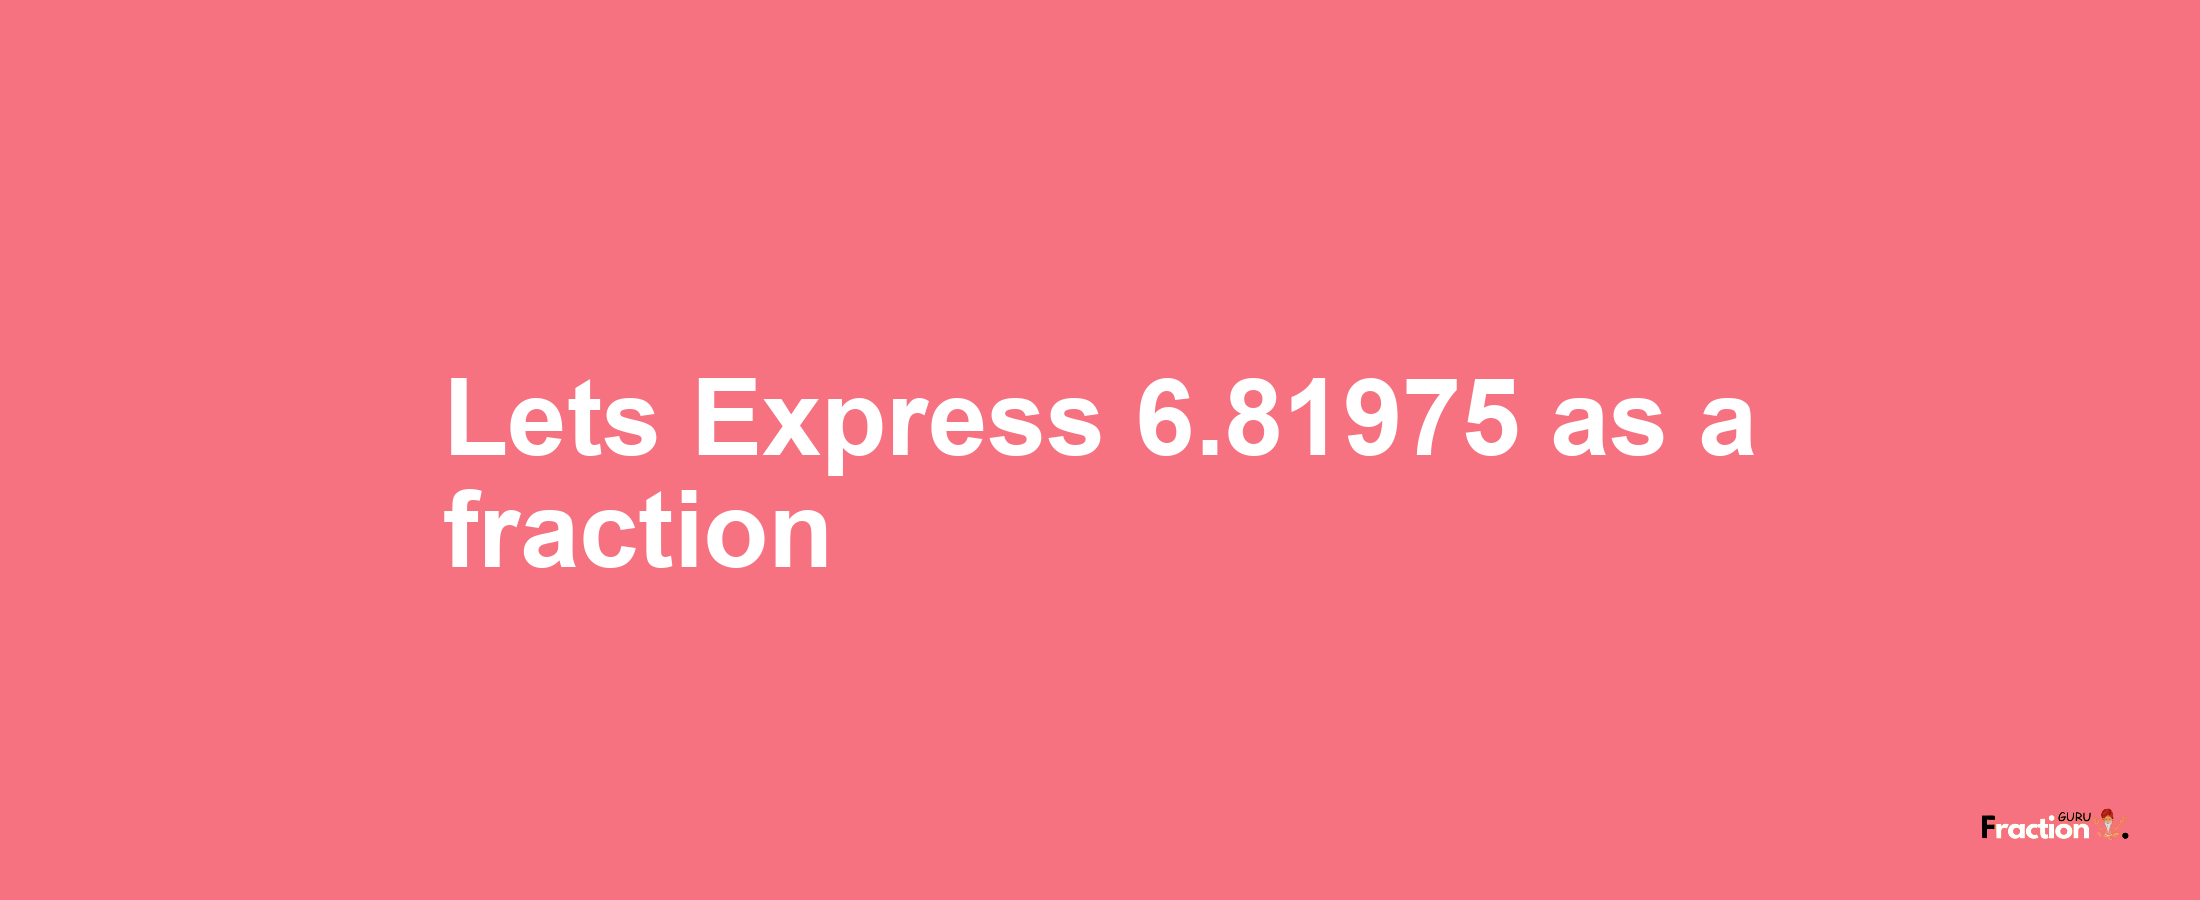 Lets Express 6.81975 as afraction